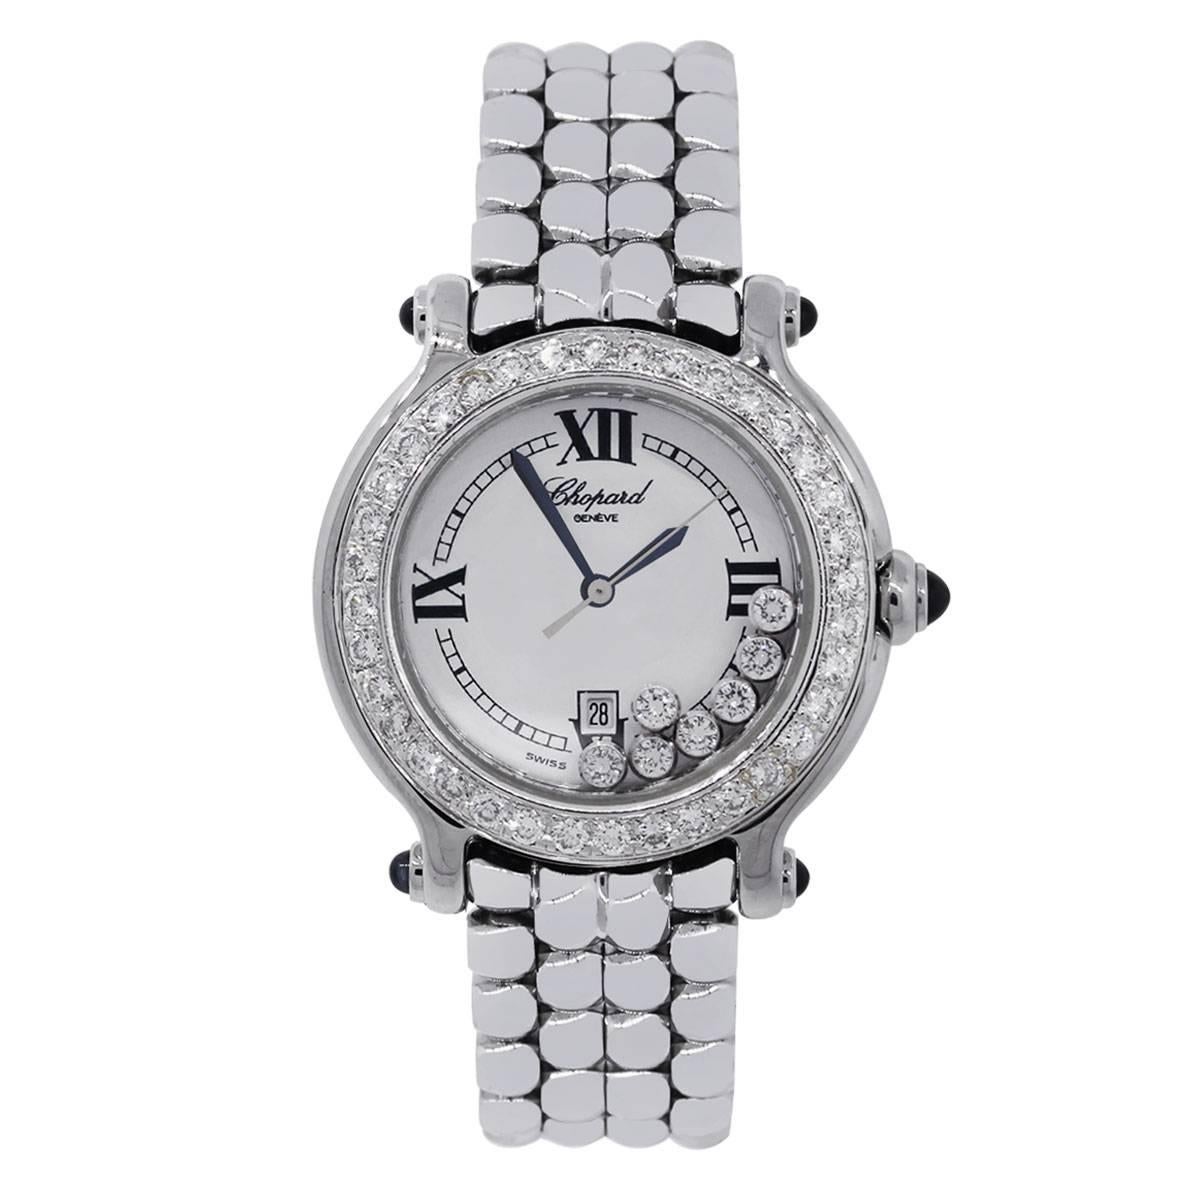 Brand: Chopard
MPN: 27/8236
Model: Happy Sport
Case Material: Stainless Steel
Case Diameter: 36mm
Crystal: Scratch resistant sapphire
Bezel: Diamond stainless steel fixed bezel
Dial: White dial with black roman numerals. Date is displayed at 6 o’